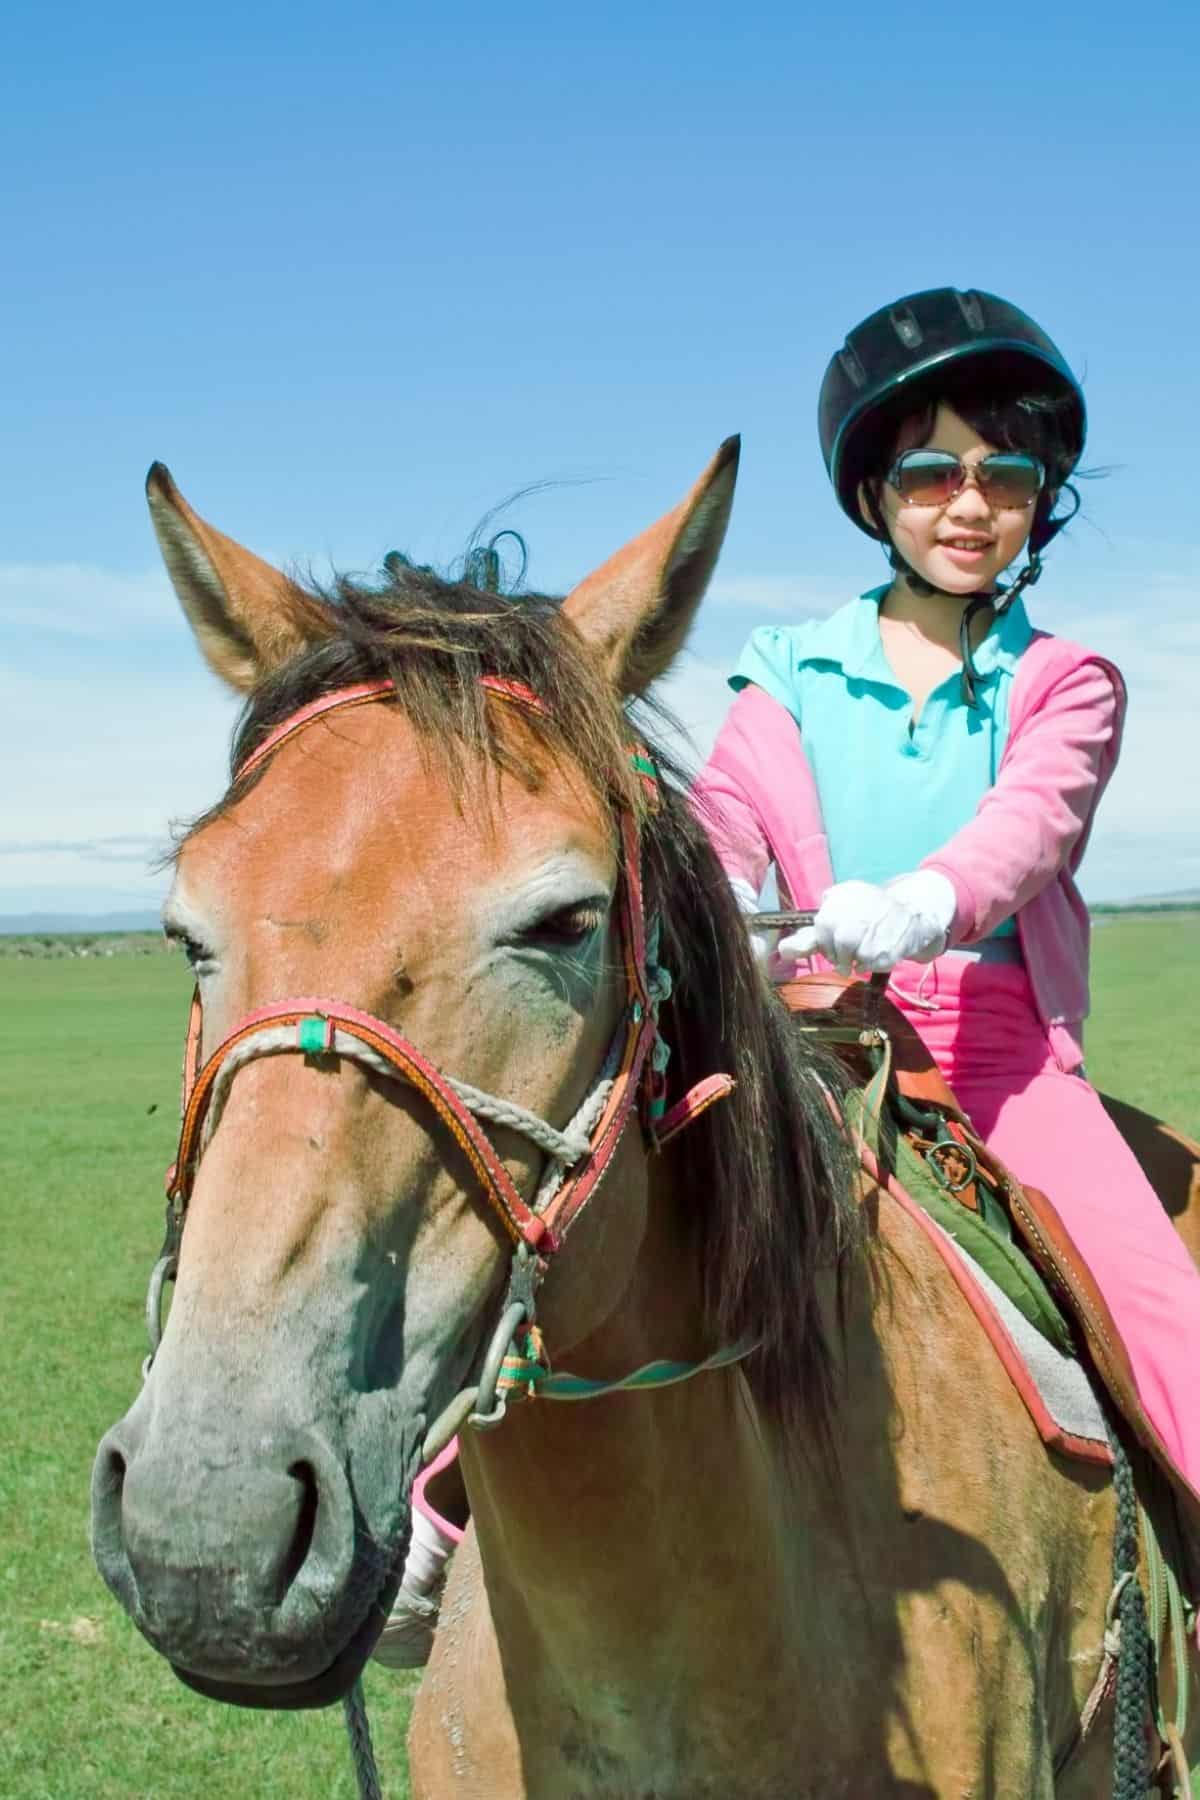 Girl in pink riding horse